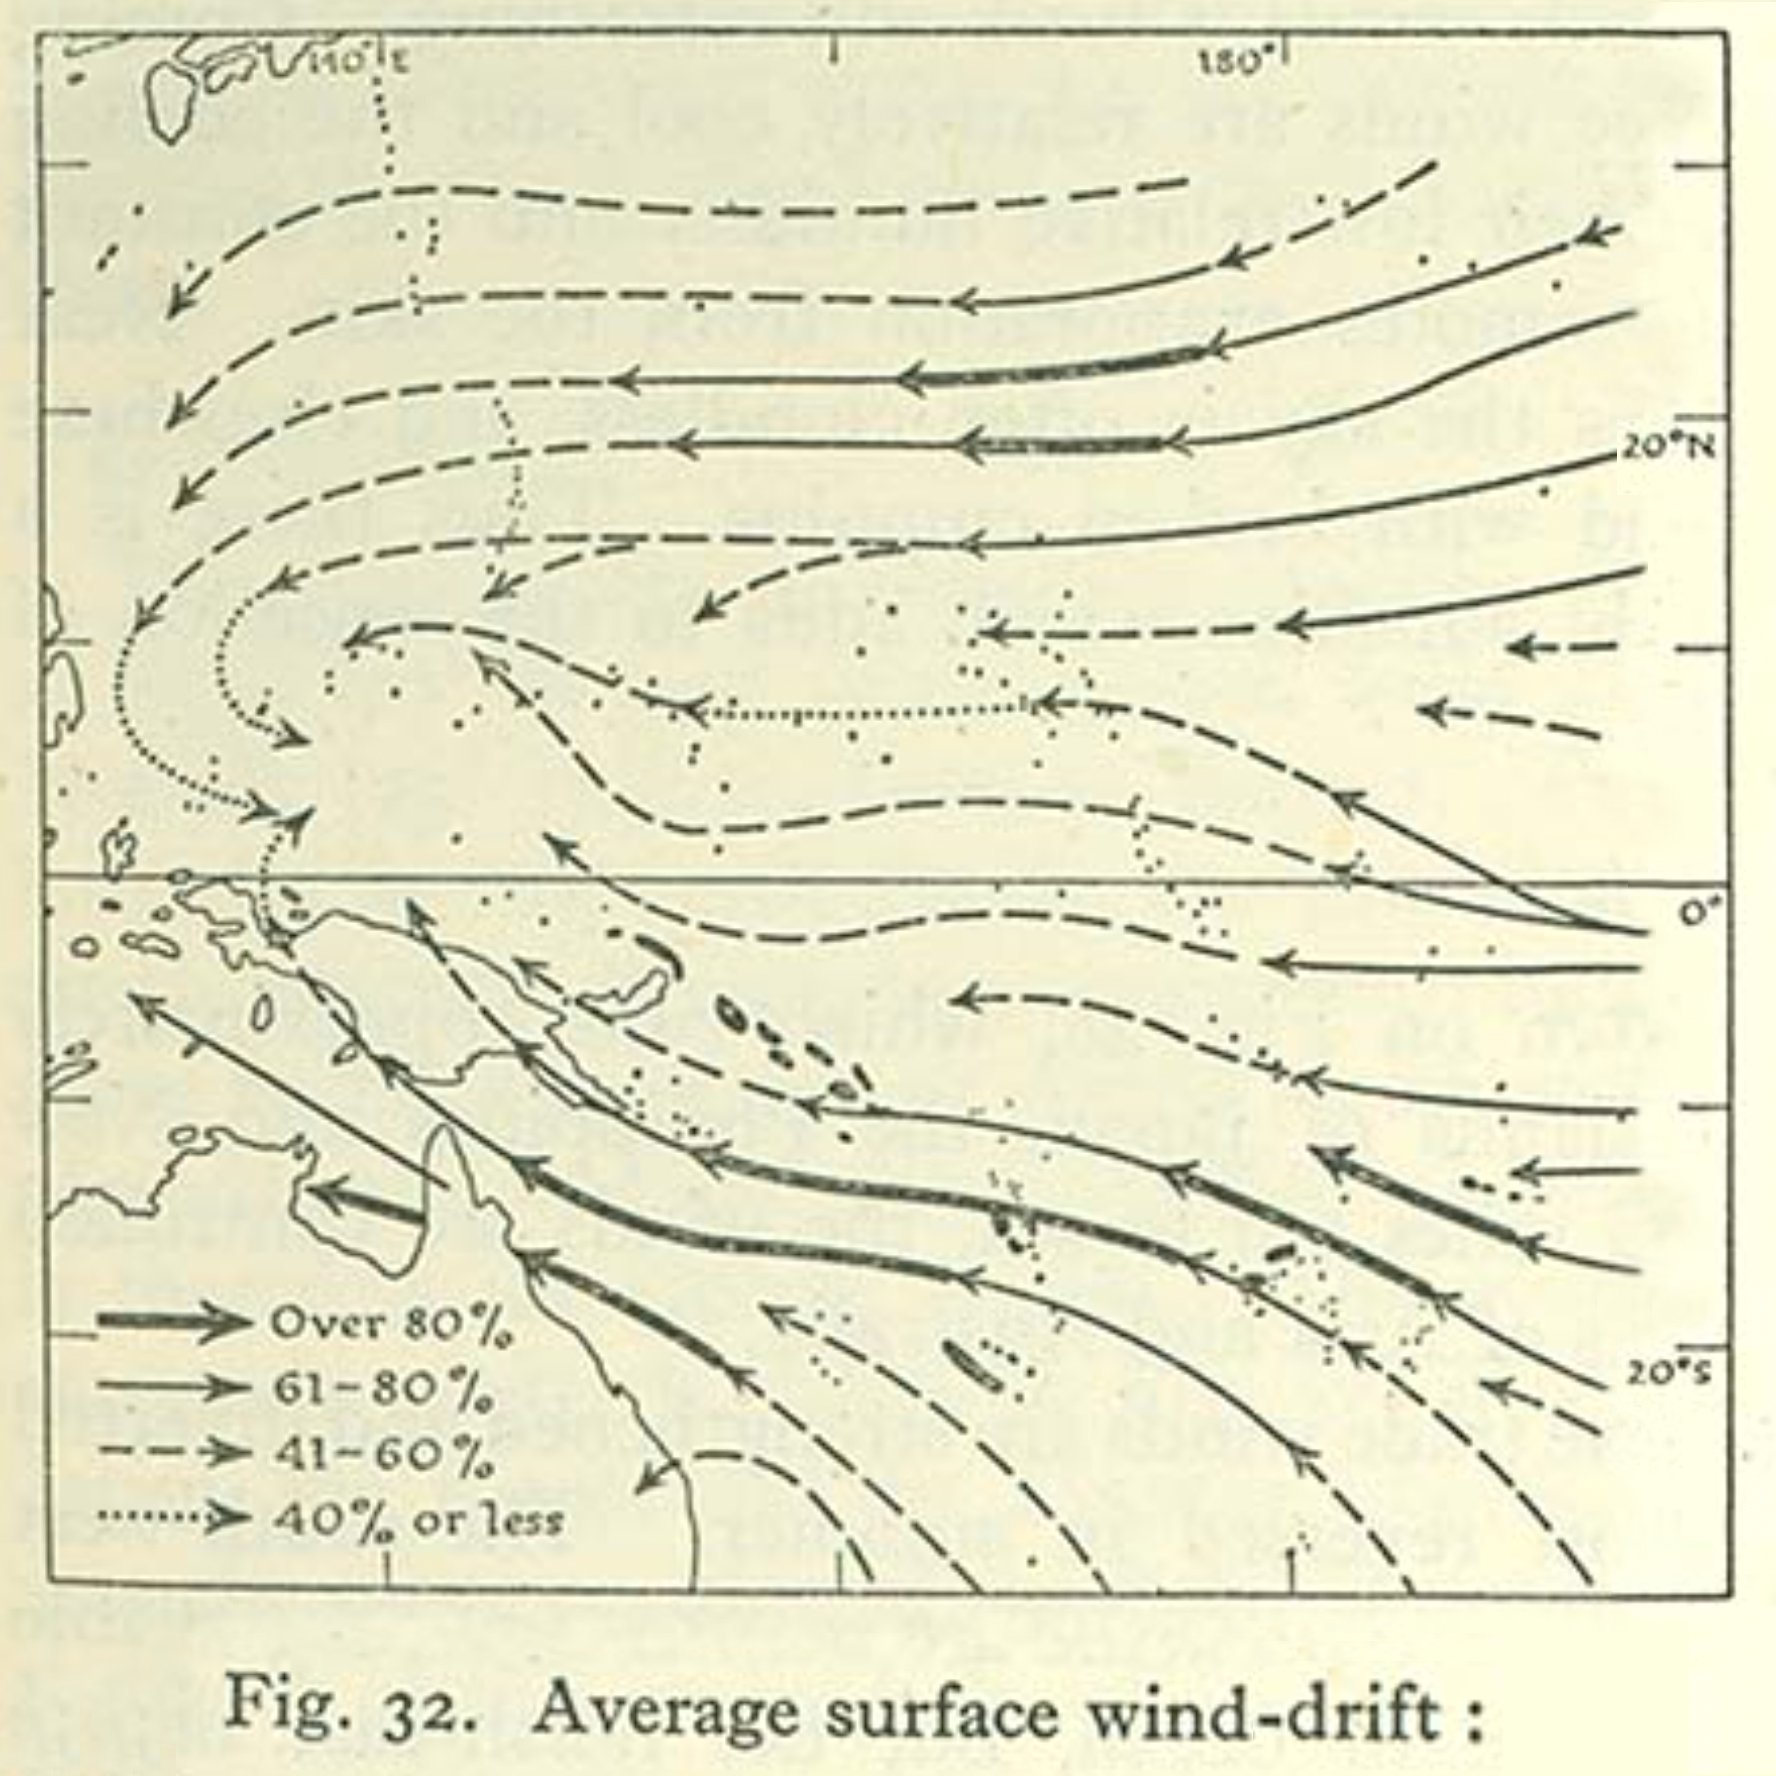 liang-jung-wind mapping.jpg